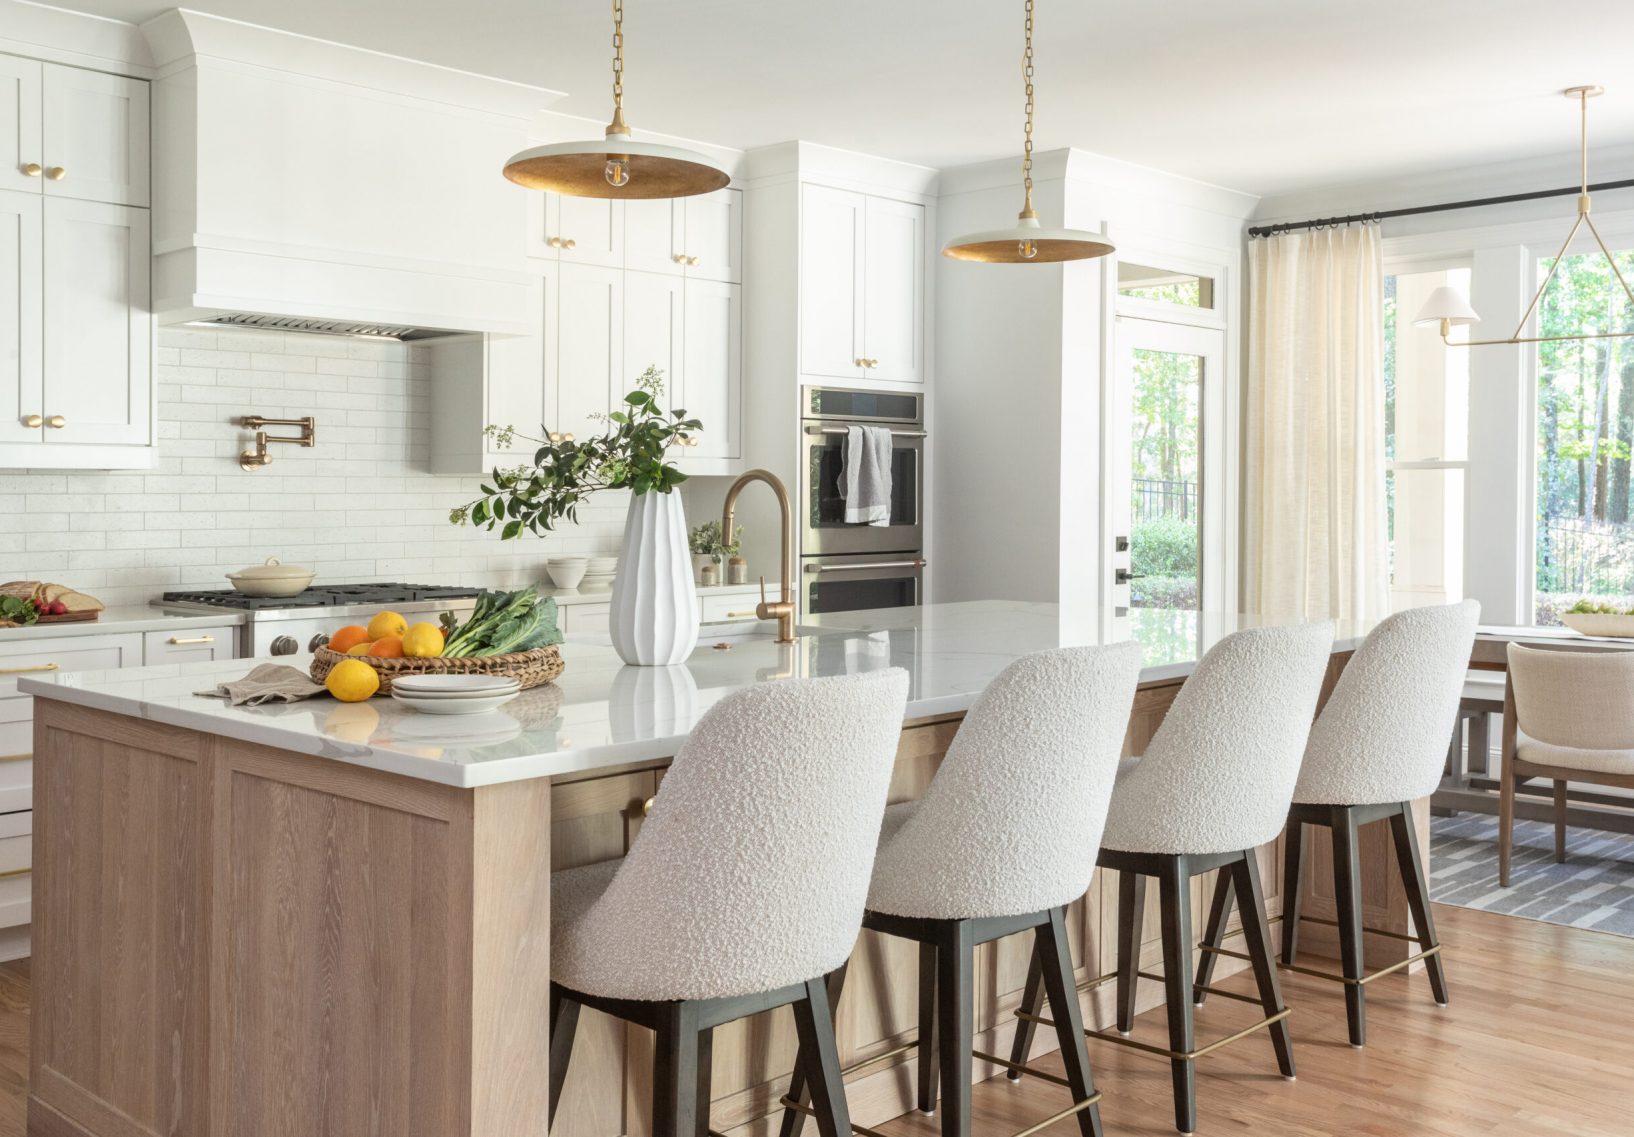 Modern kitchen with wood island, white swivel chairs, and pendant lights.